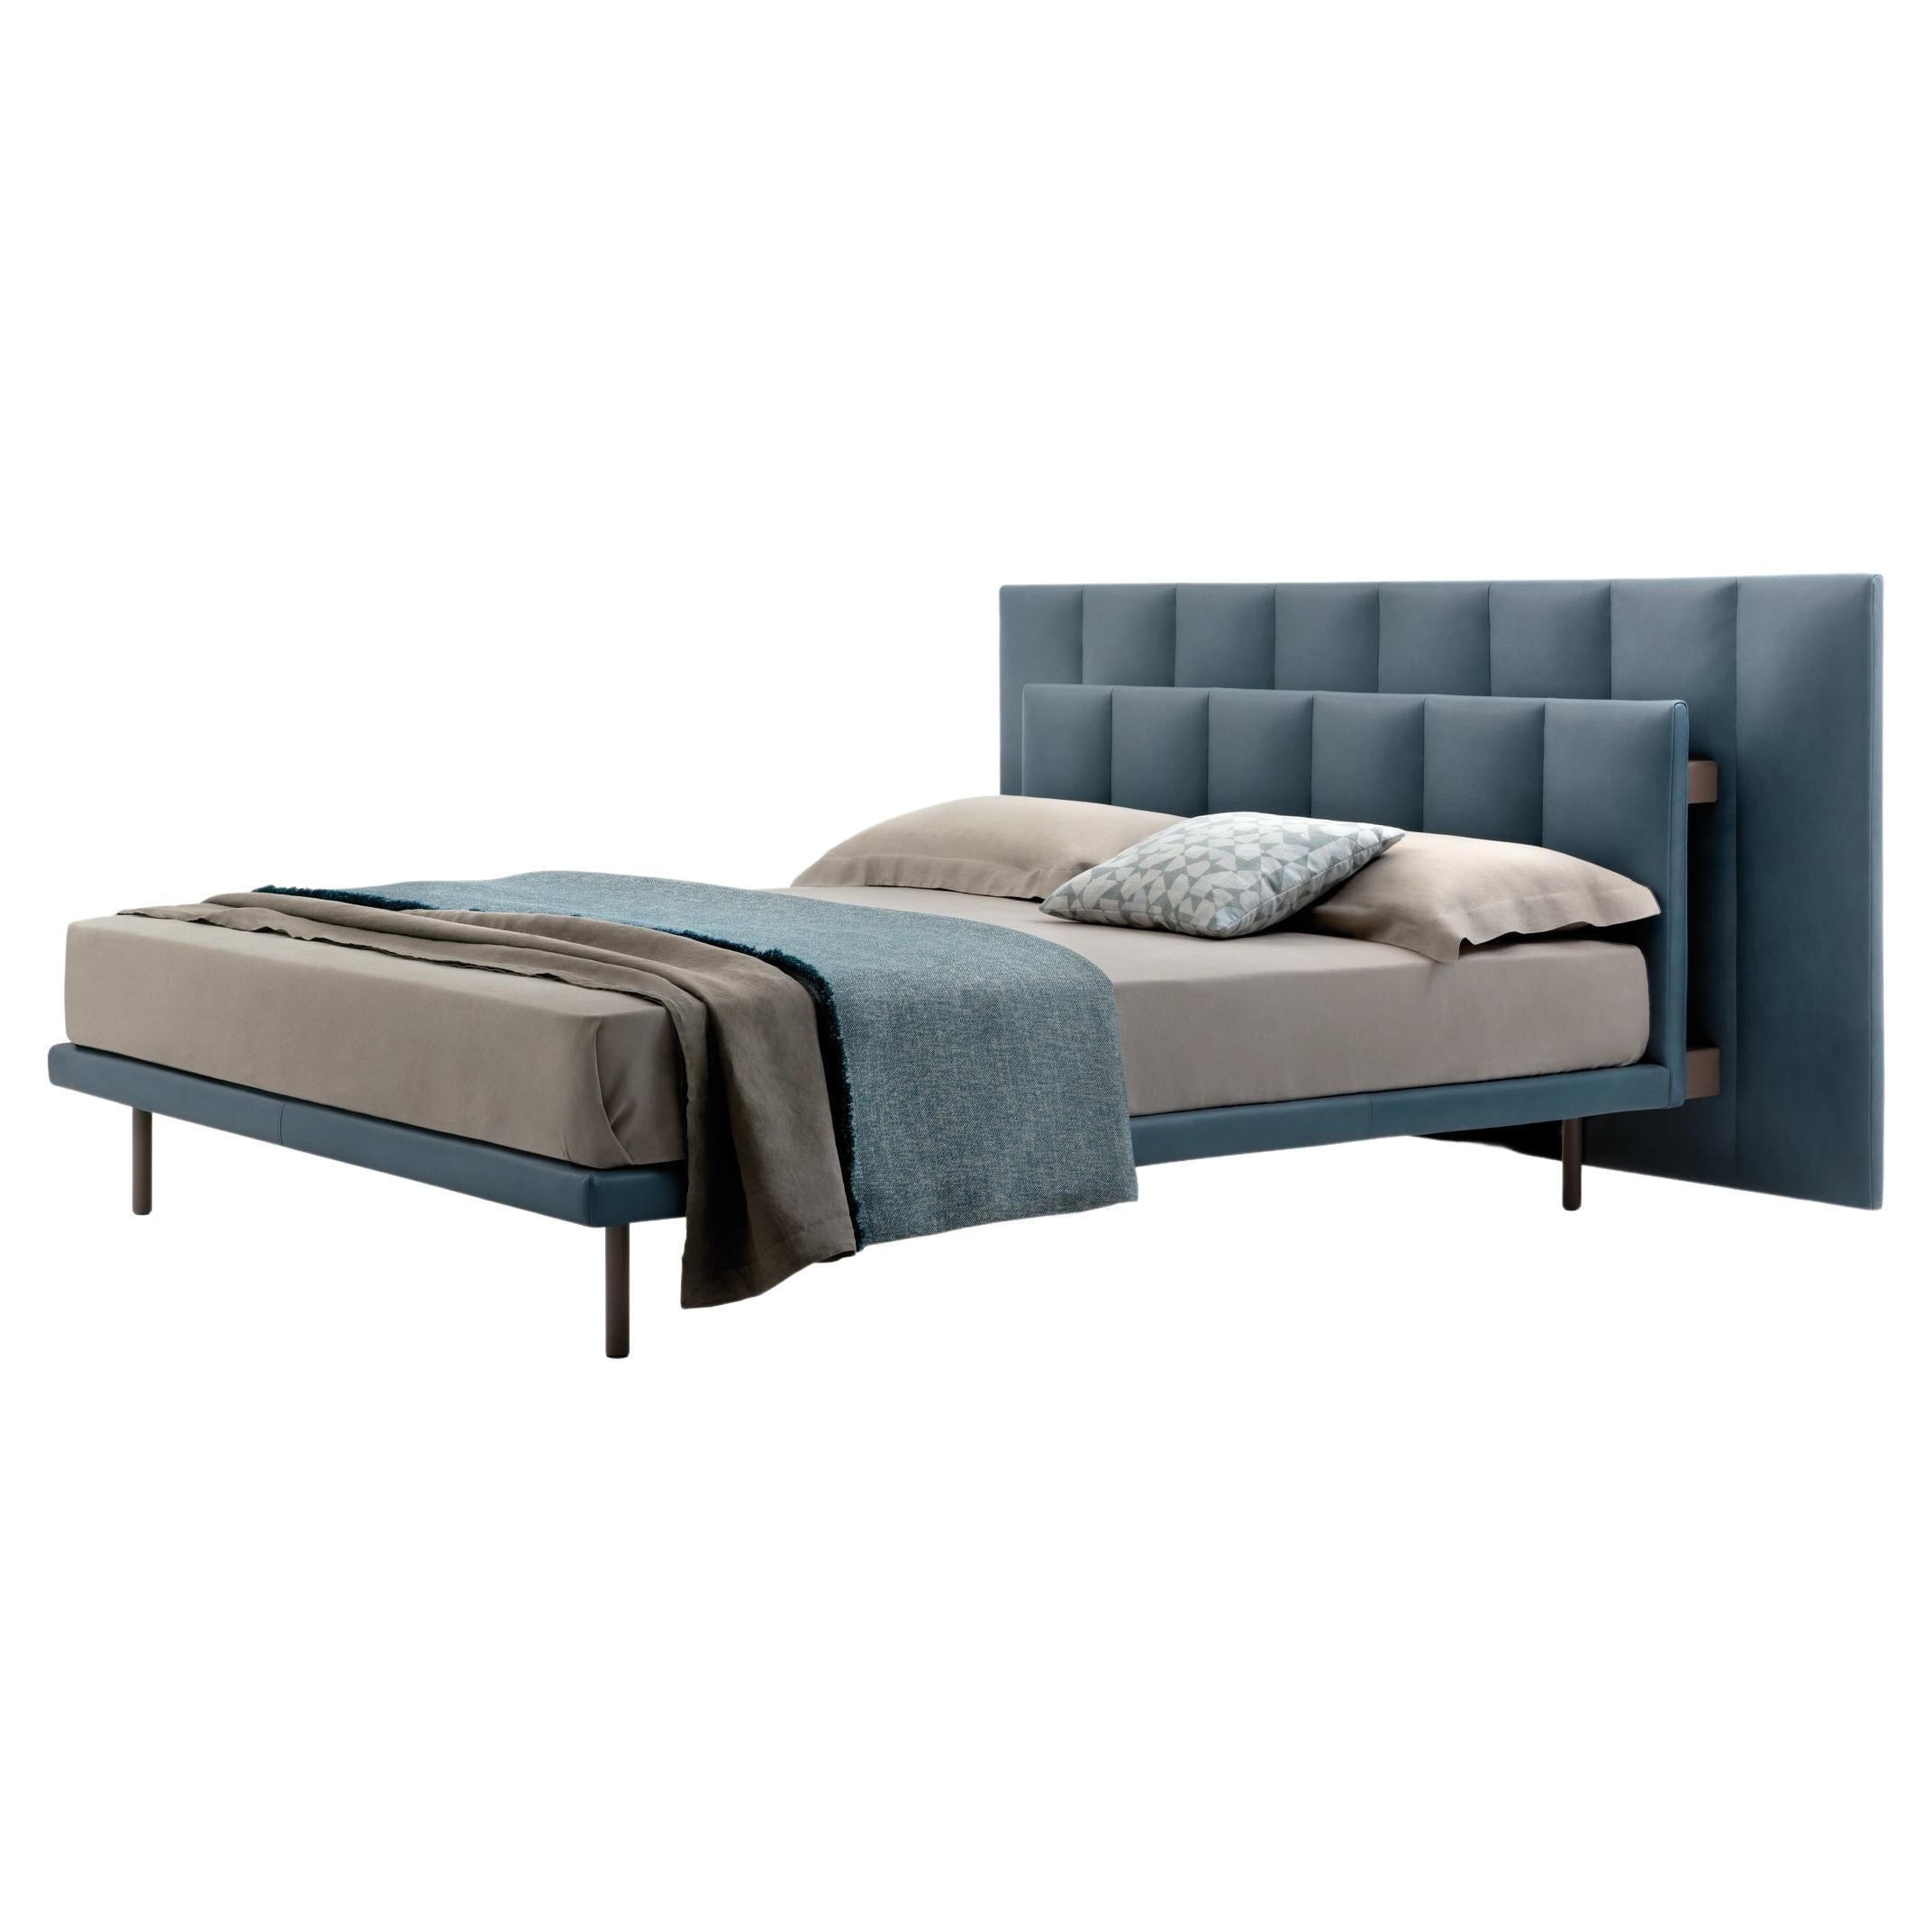 Zanotta Extra Large Grangala Bed with Single Springingin in Grey Upholstery For Sale